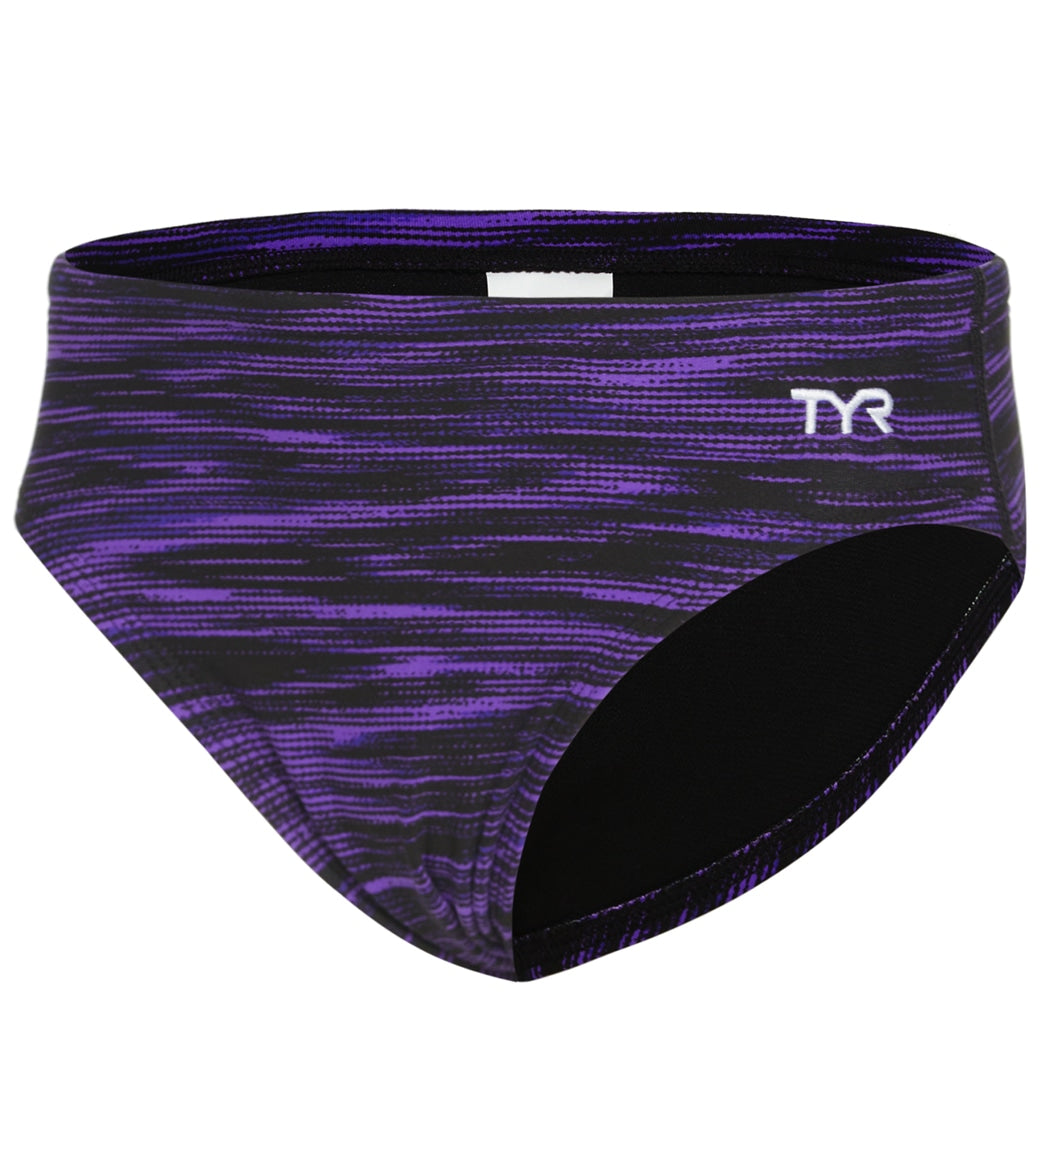 TYR Boys' Fizzy Racer Brief Swimsuit Purple at SwimOutlet.com